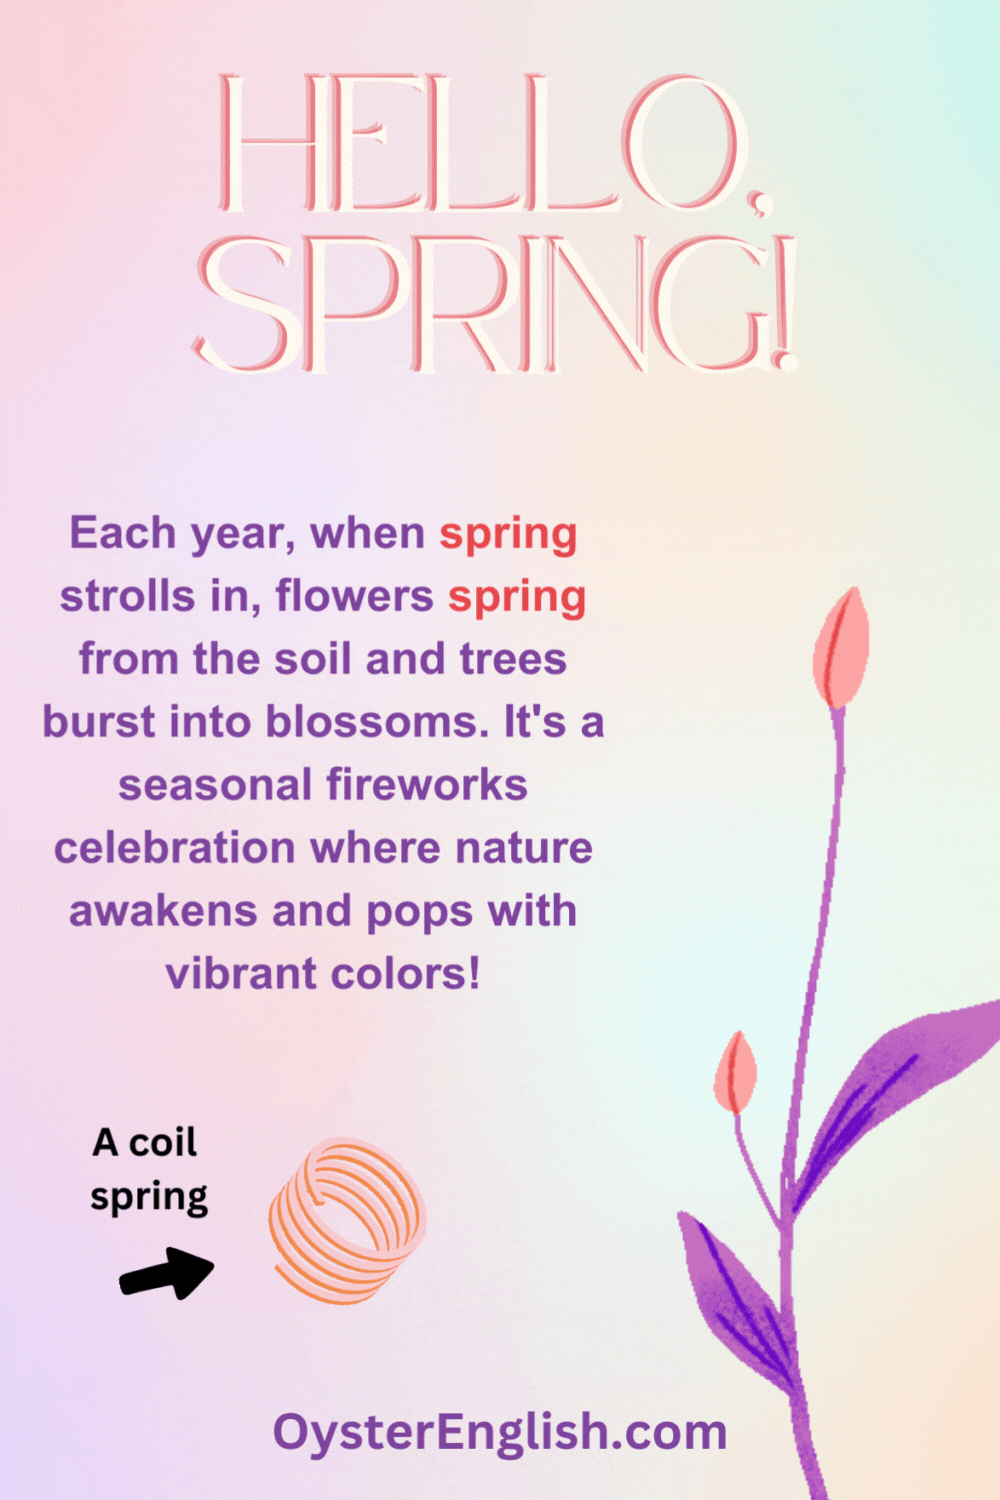 Animated image of a coil spring jumping and a flower blossoming, illustrating the dual meaning of 'spring' as both a mechanical action and a seasonal bloom.